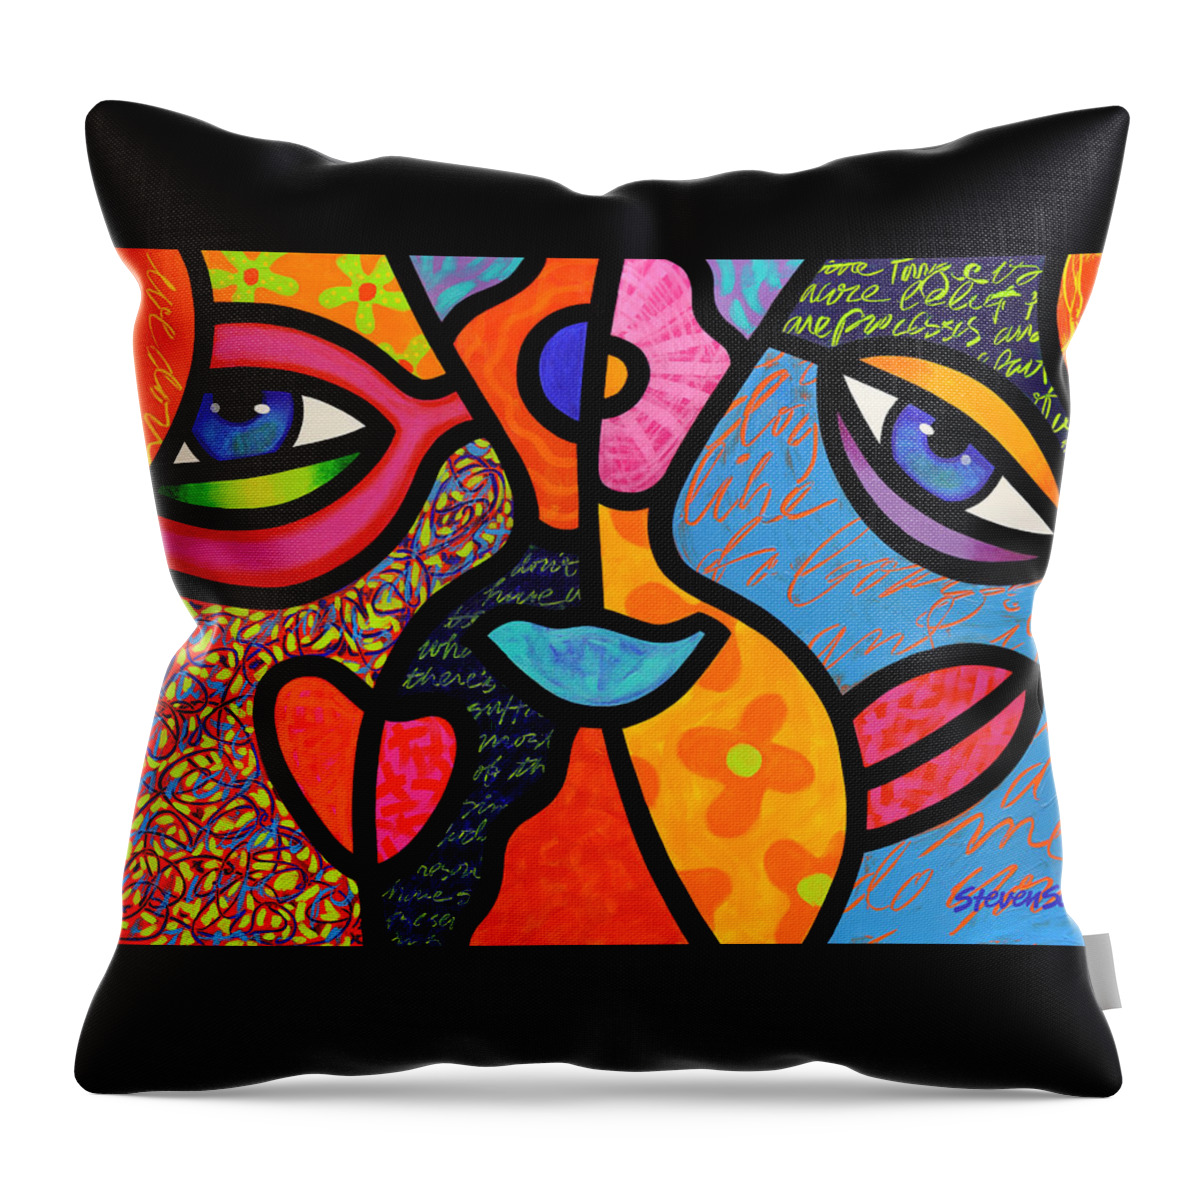 Eyes Throw Pillow featuring the painting Eye to Eye by Steven Scott